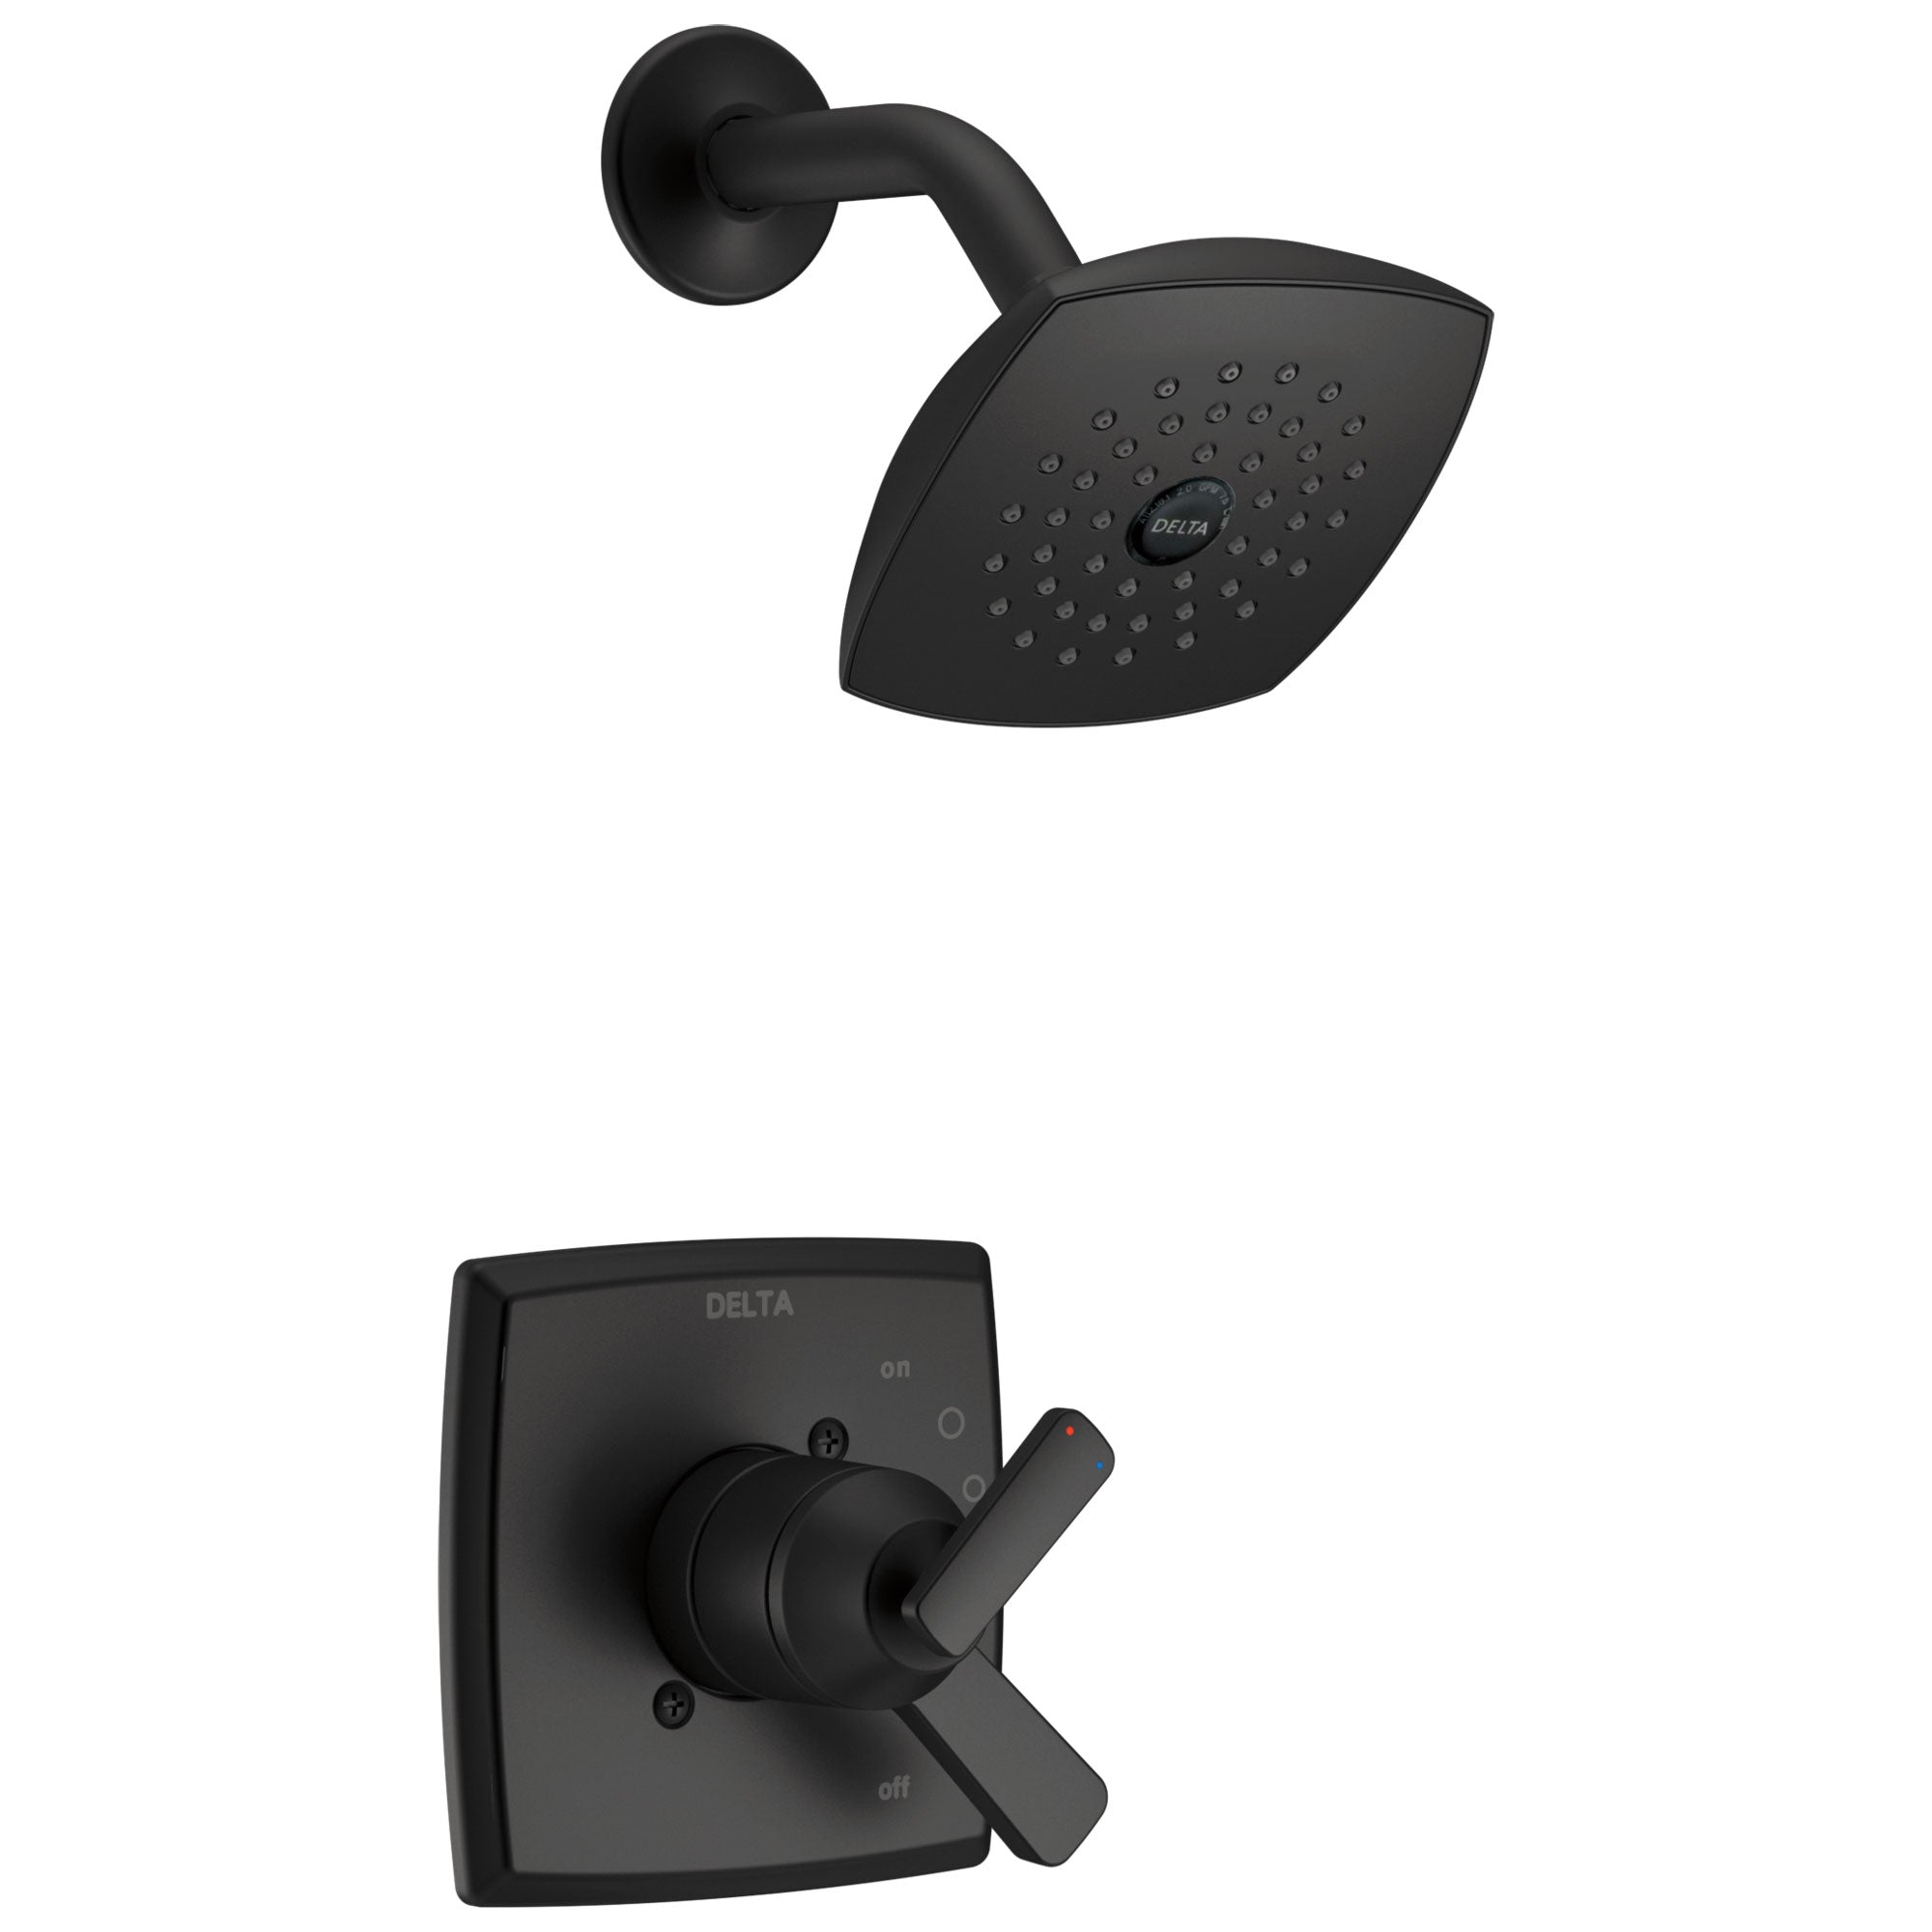 Delta Ashlyn Matte Black Finish Monitor 17 Series Shower only Faucet with Cartridge, Handles, and Rough-in Valve with Stops D3378V